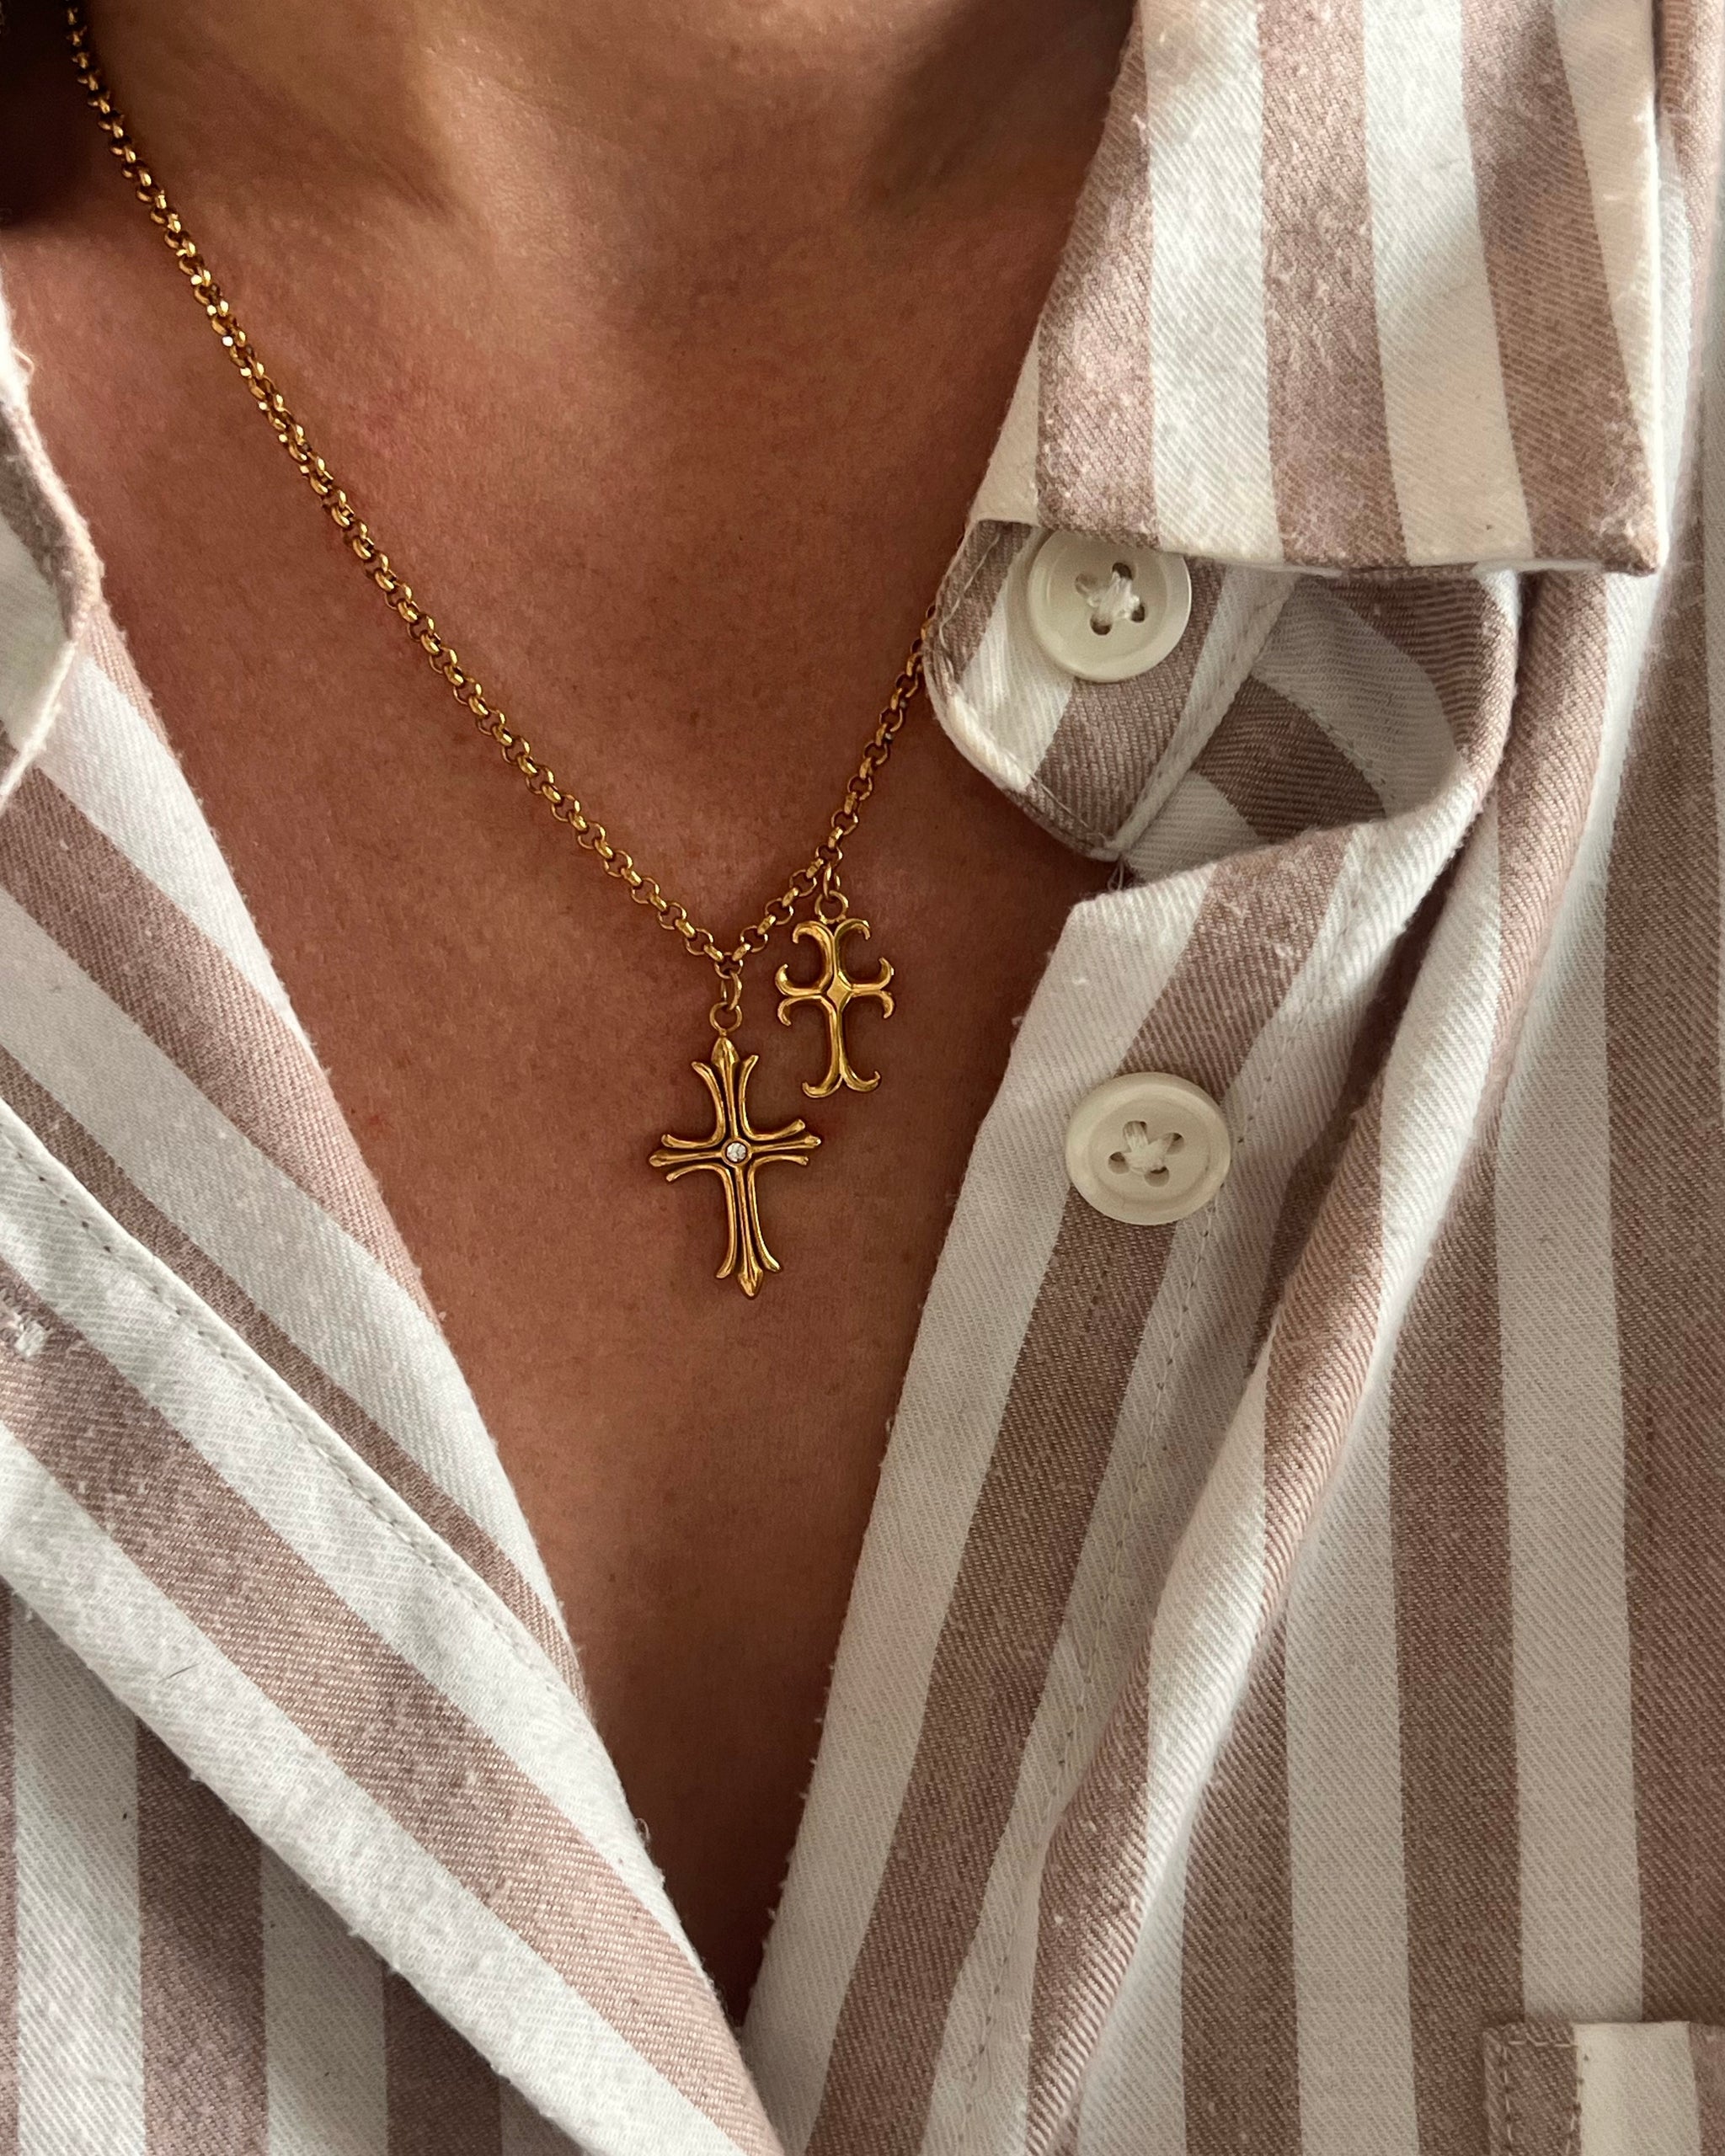 Layered Cross Necklace With CZ Stone or Birthstone, Double Chain Cross  Necklace in 14K Solid Gold, Sterling Silver, Yellow or Rose Gold. - Etsy  Finland